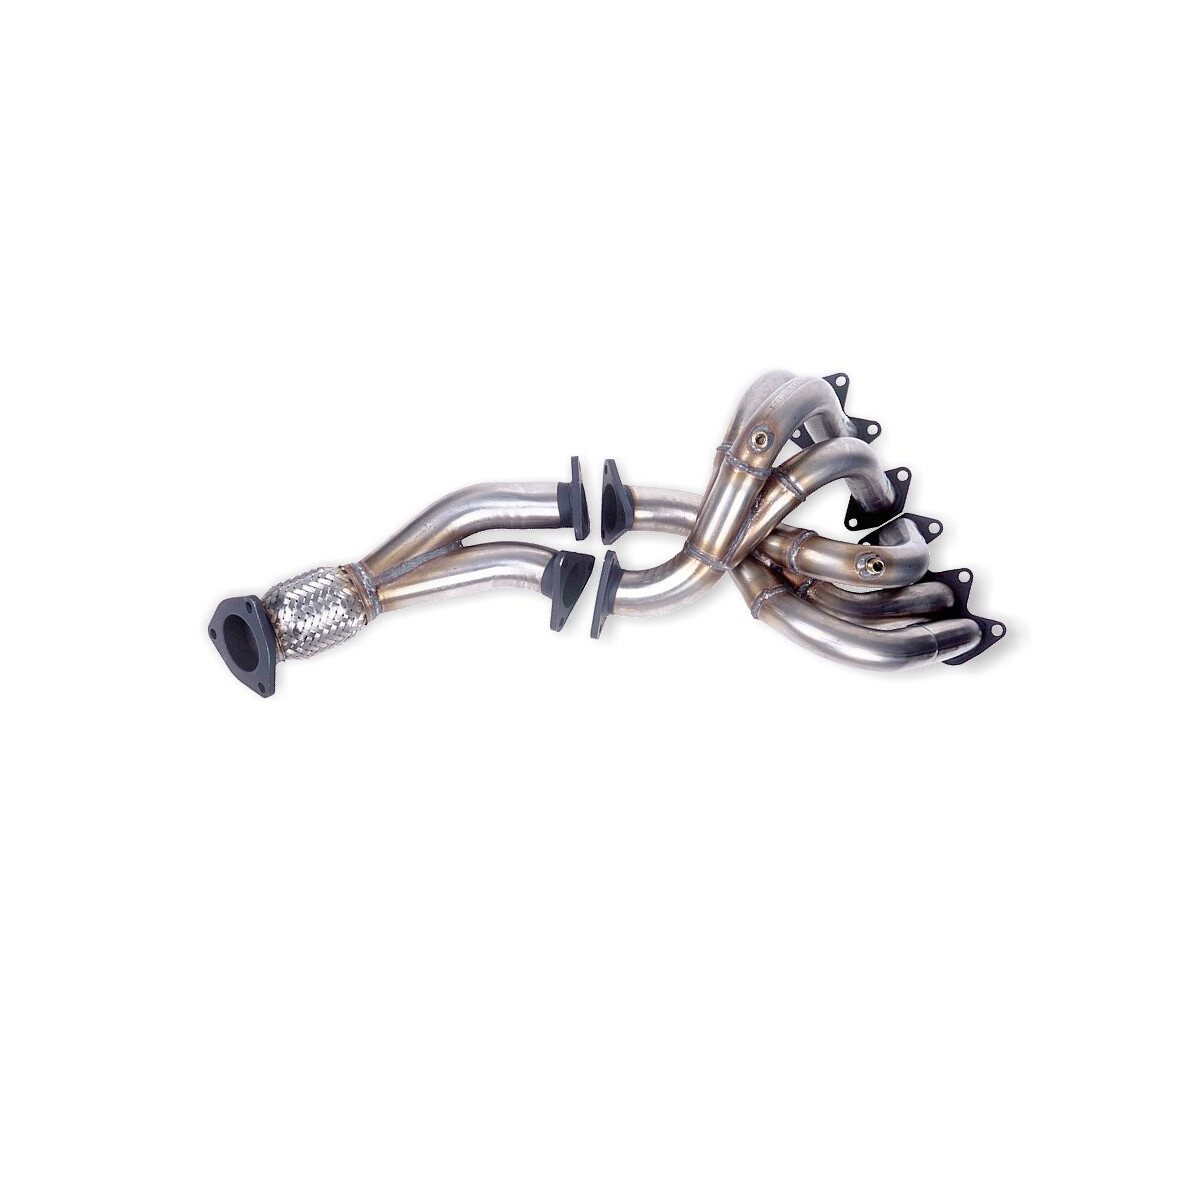 TeZet stainless steel exhaust header for 80, Typ 81,...